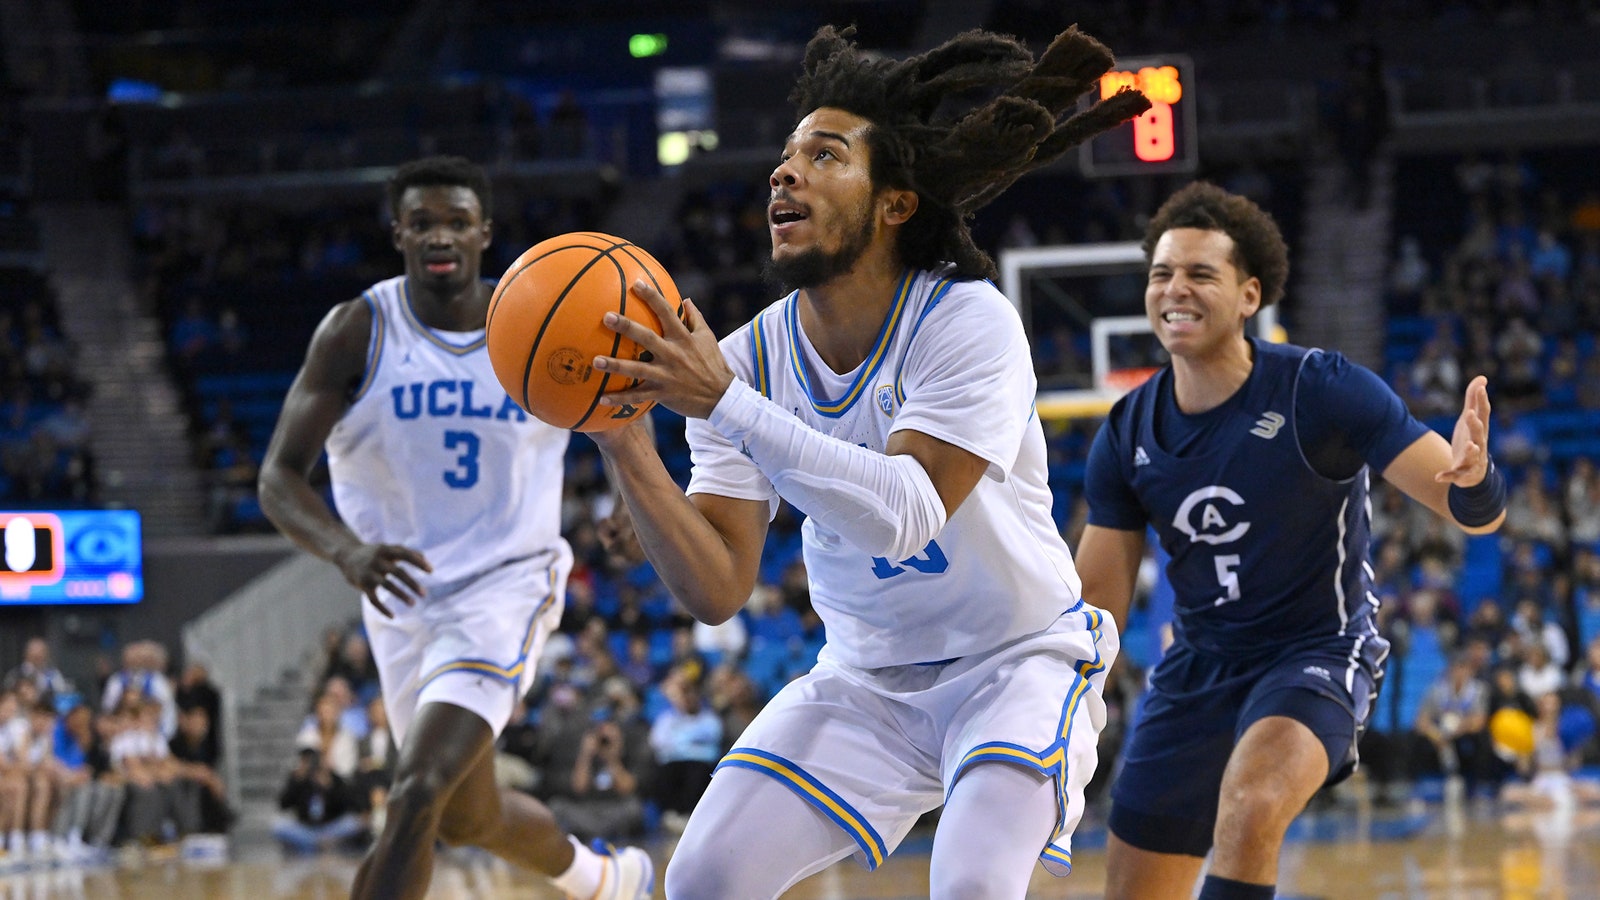 Andy Katz shares his list of top playmakers in college basketball